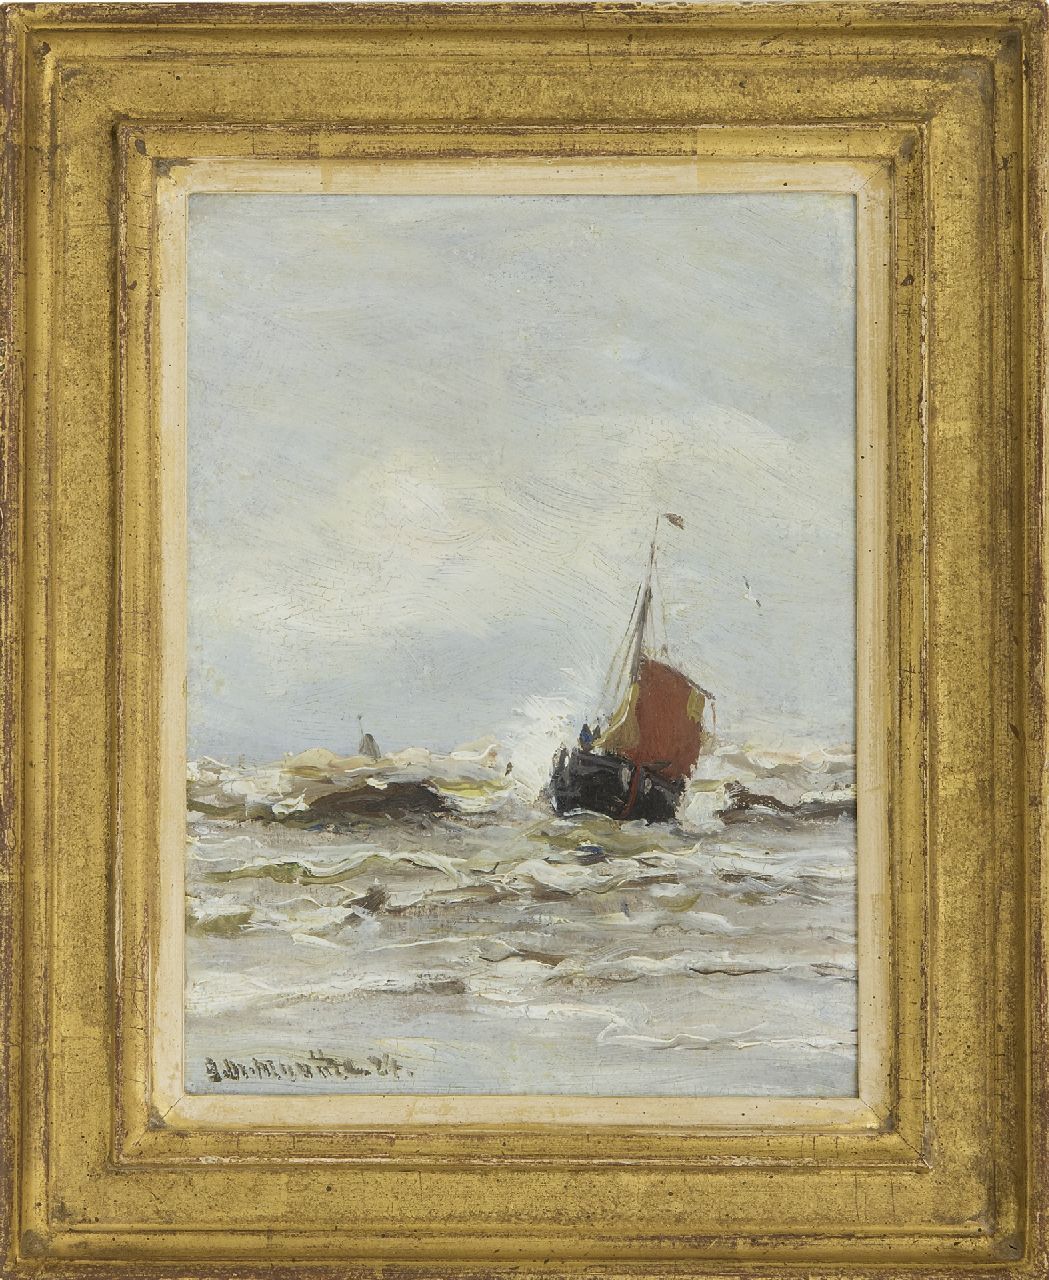 Munthe G.A.L.  | Gerhard Arij Ludwig 'Morgenstjerne' Munthe, Fishing boat in the surf, oil on painter's board 20.0 x 15.0 cm, signed l.l. and dated '24